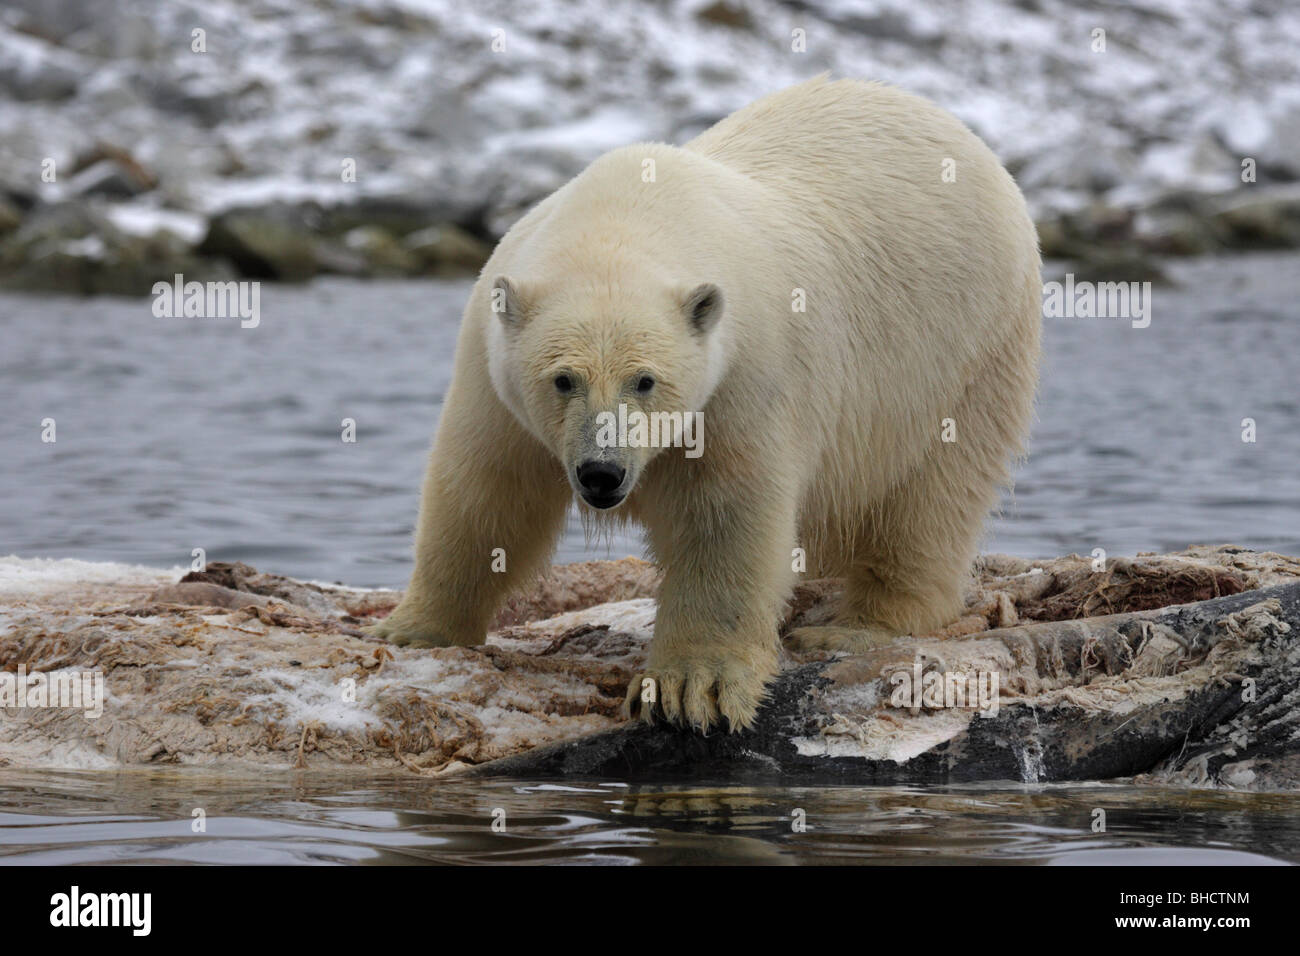 Polar Bear Ursus maritimus close standing feeding with eye contact on fin whale carcass floating in the water with a reflection Stock Photo